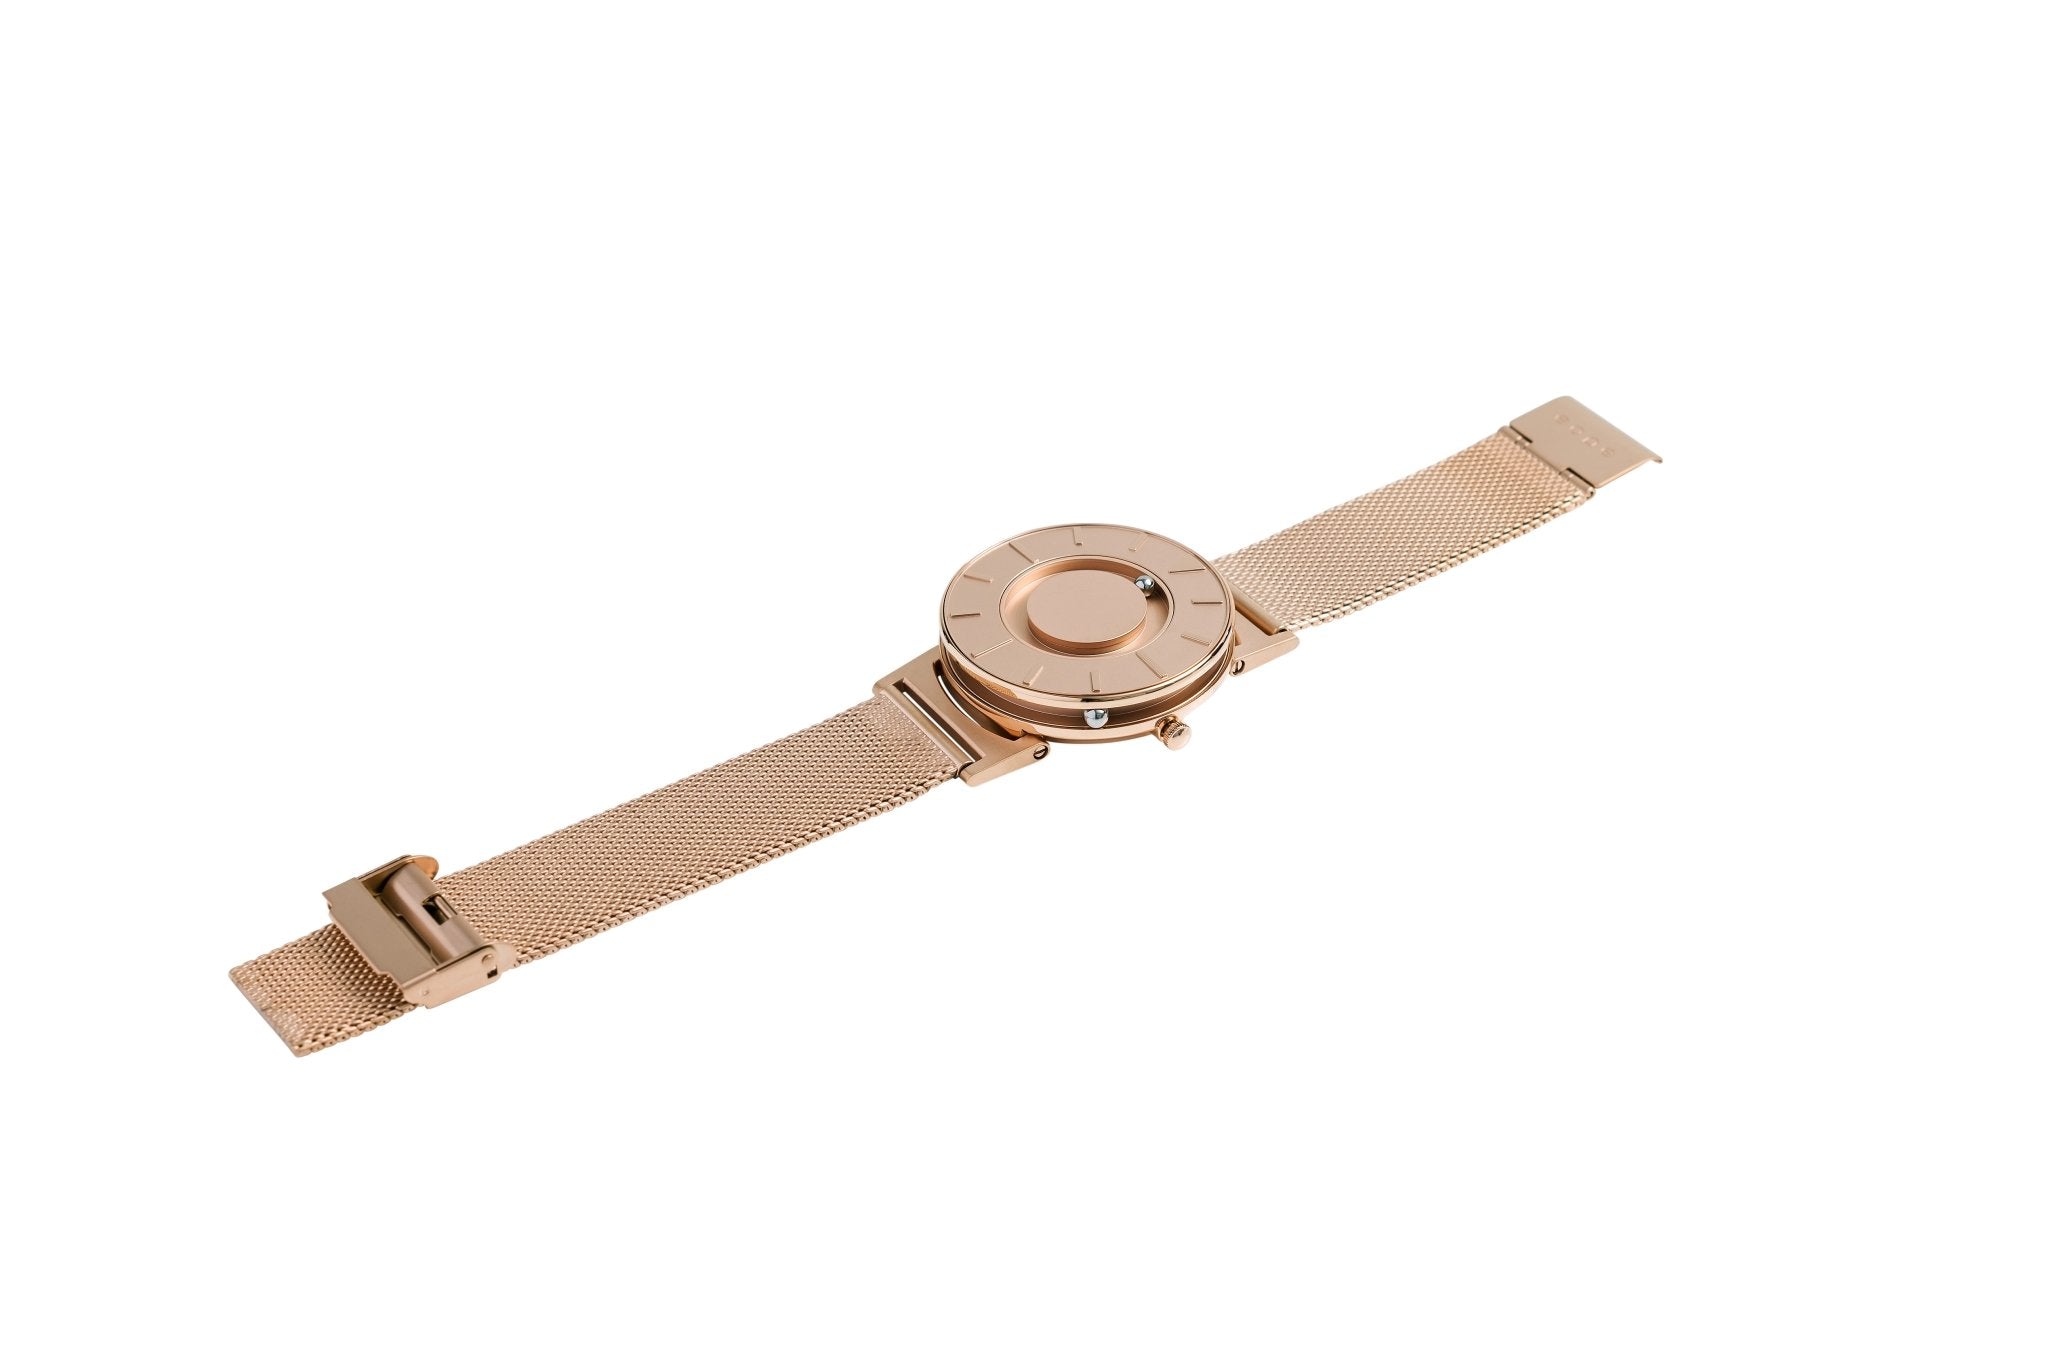 Eone Bradley Rose Gold Mesh - Watches & Crystals